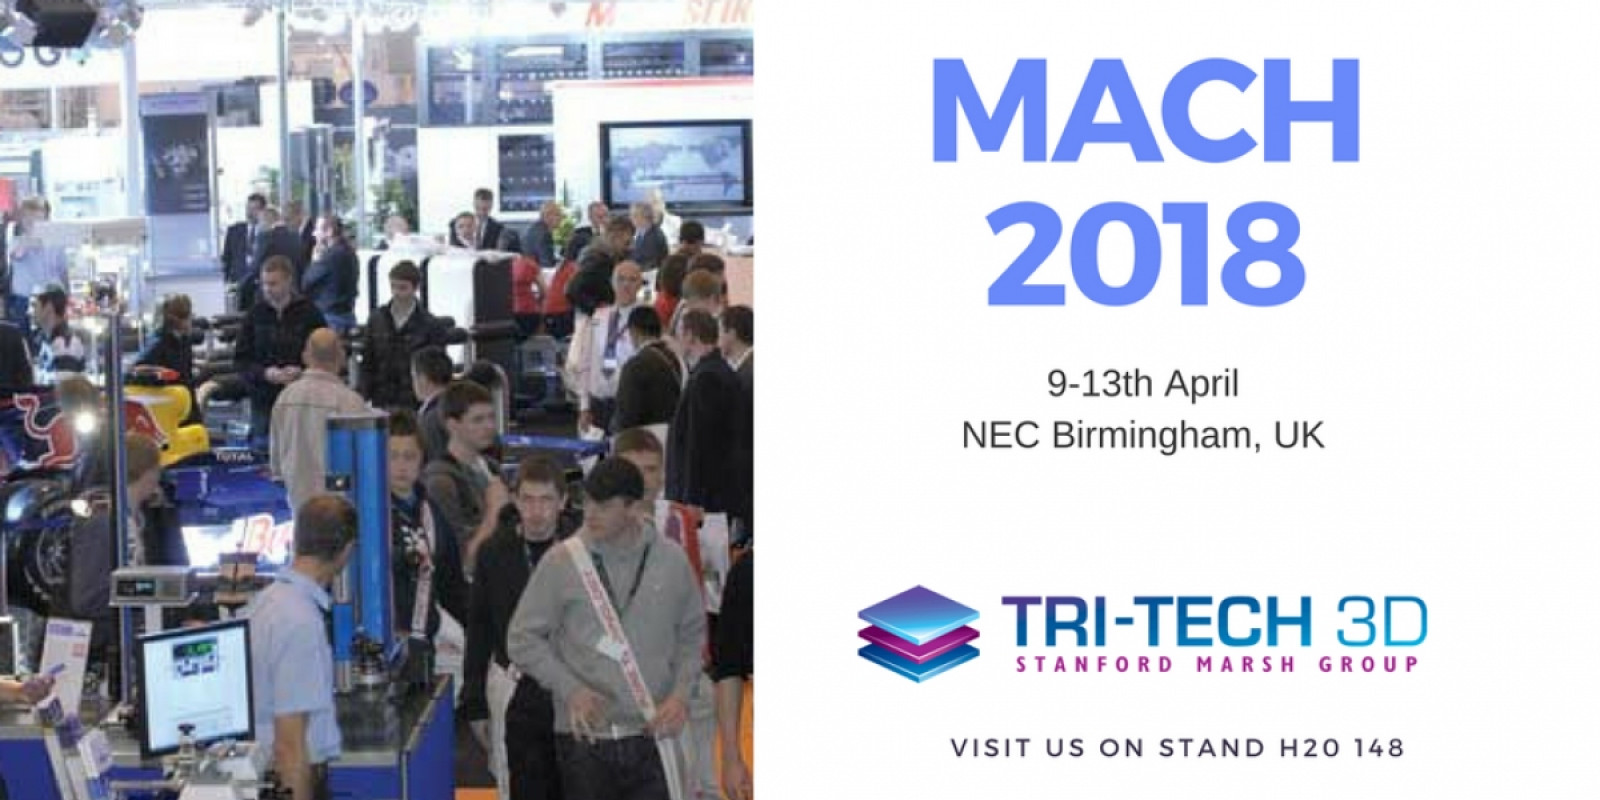 We're exhibiting at the MACH show 2018